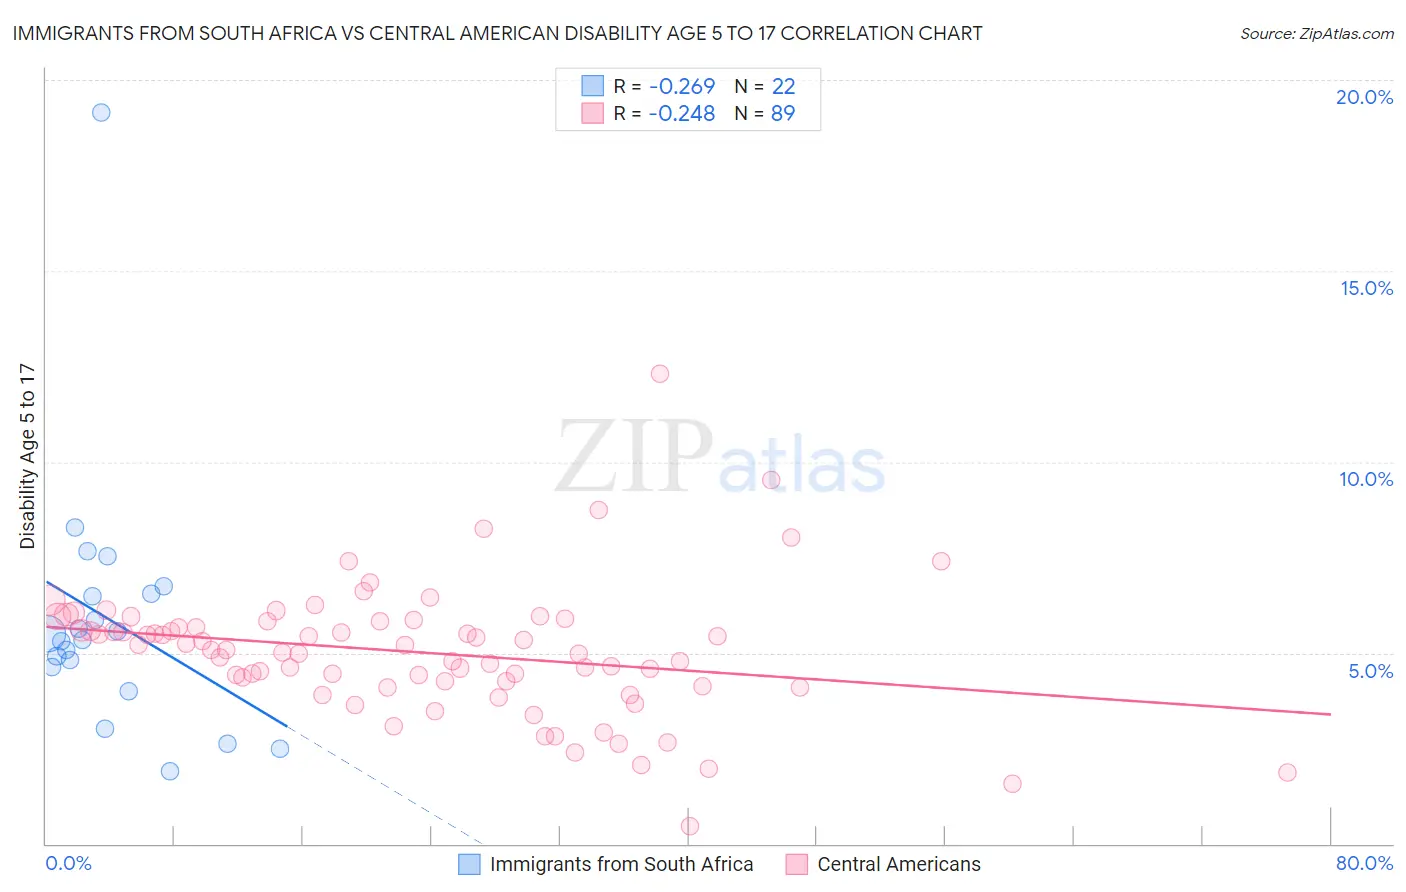 Immigrants from South Africa vs Central American Disability Age 5 to 17